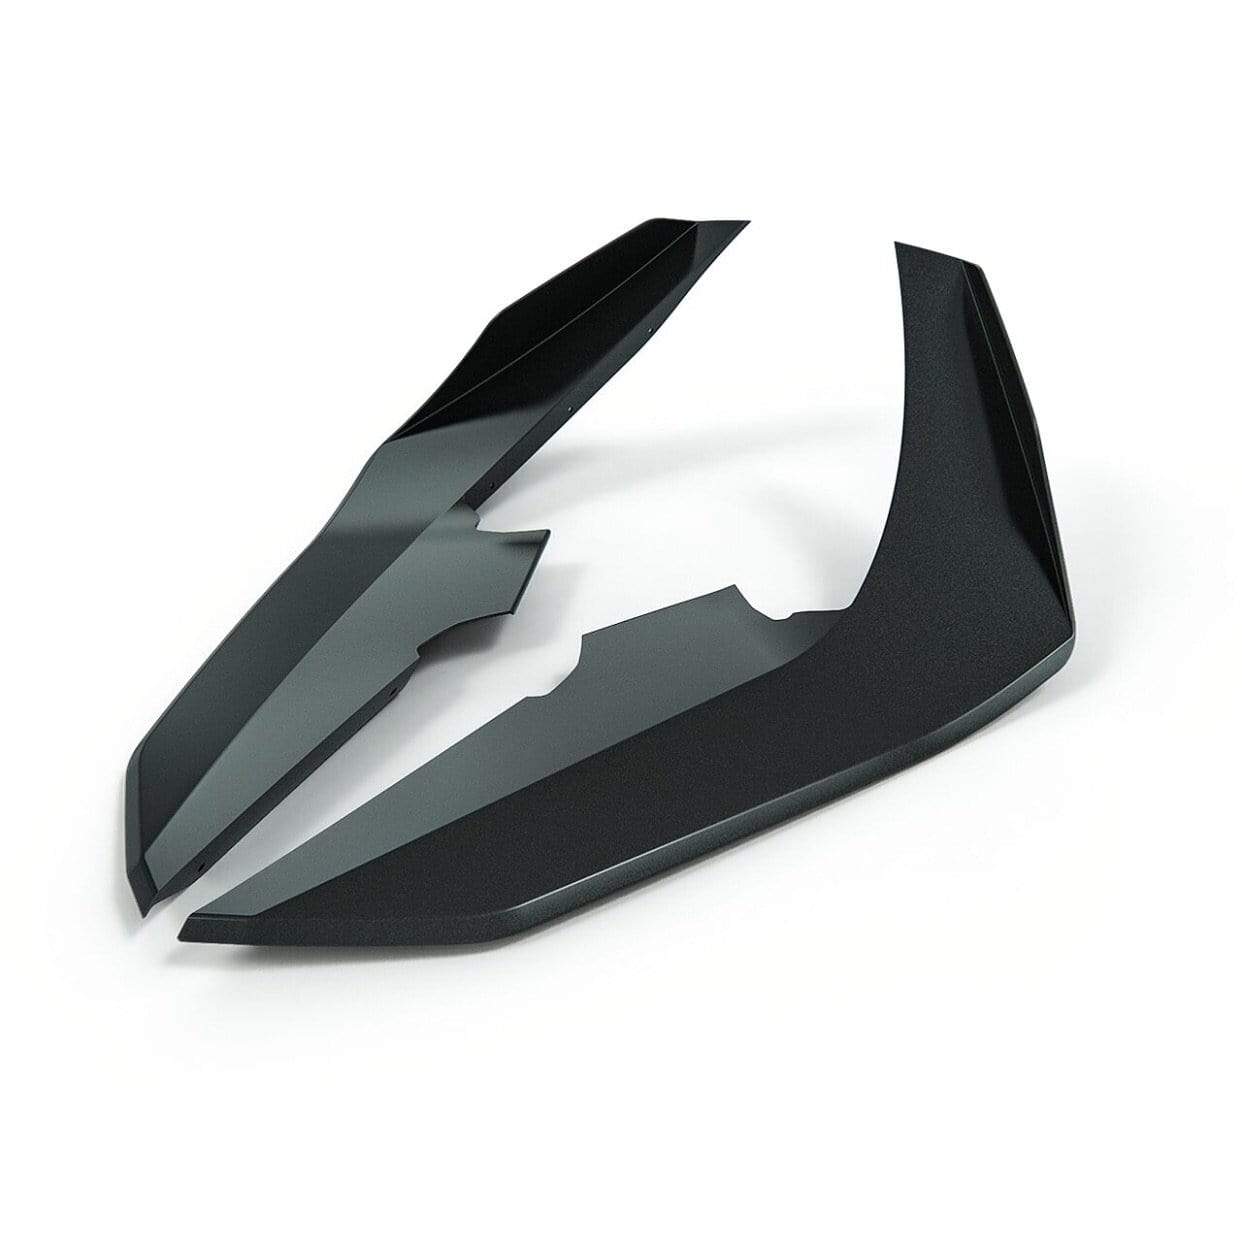 ACS Composite SS Canards in Gloss Black [48-4-085]GBA for Camaro 2016-2018, generating downforce for improved grip and faster cornering.